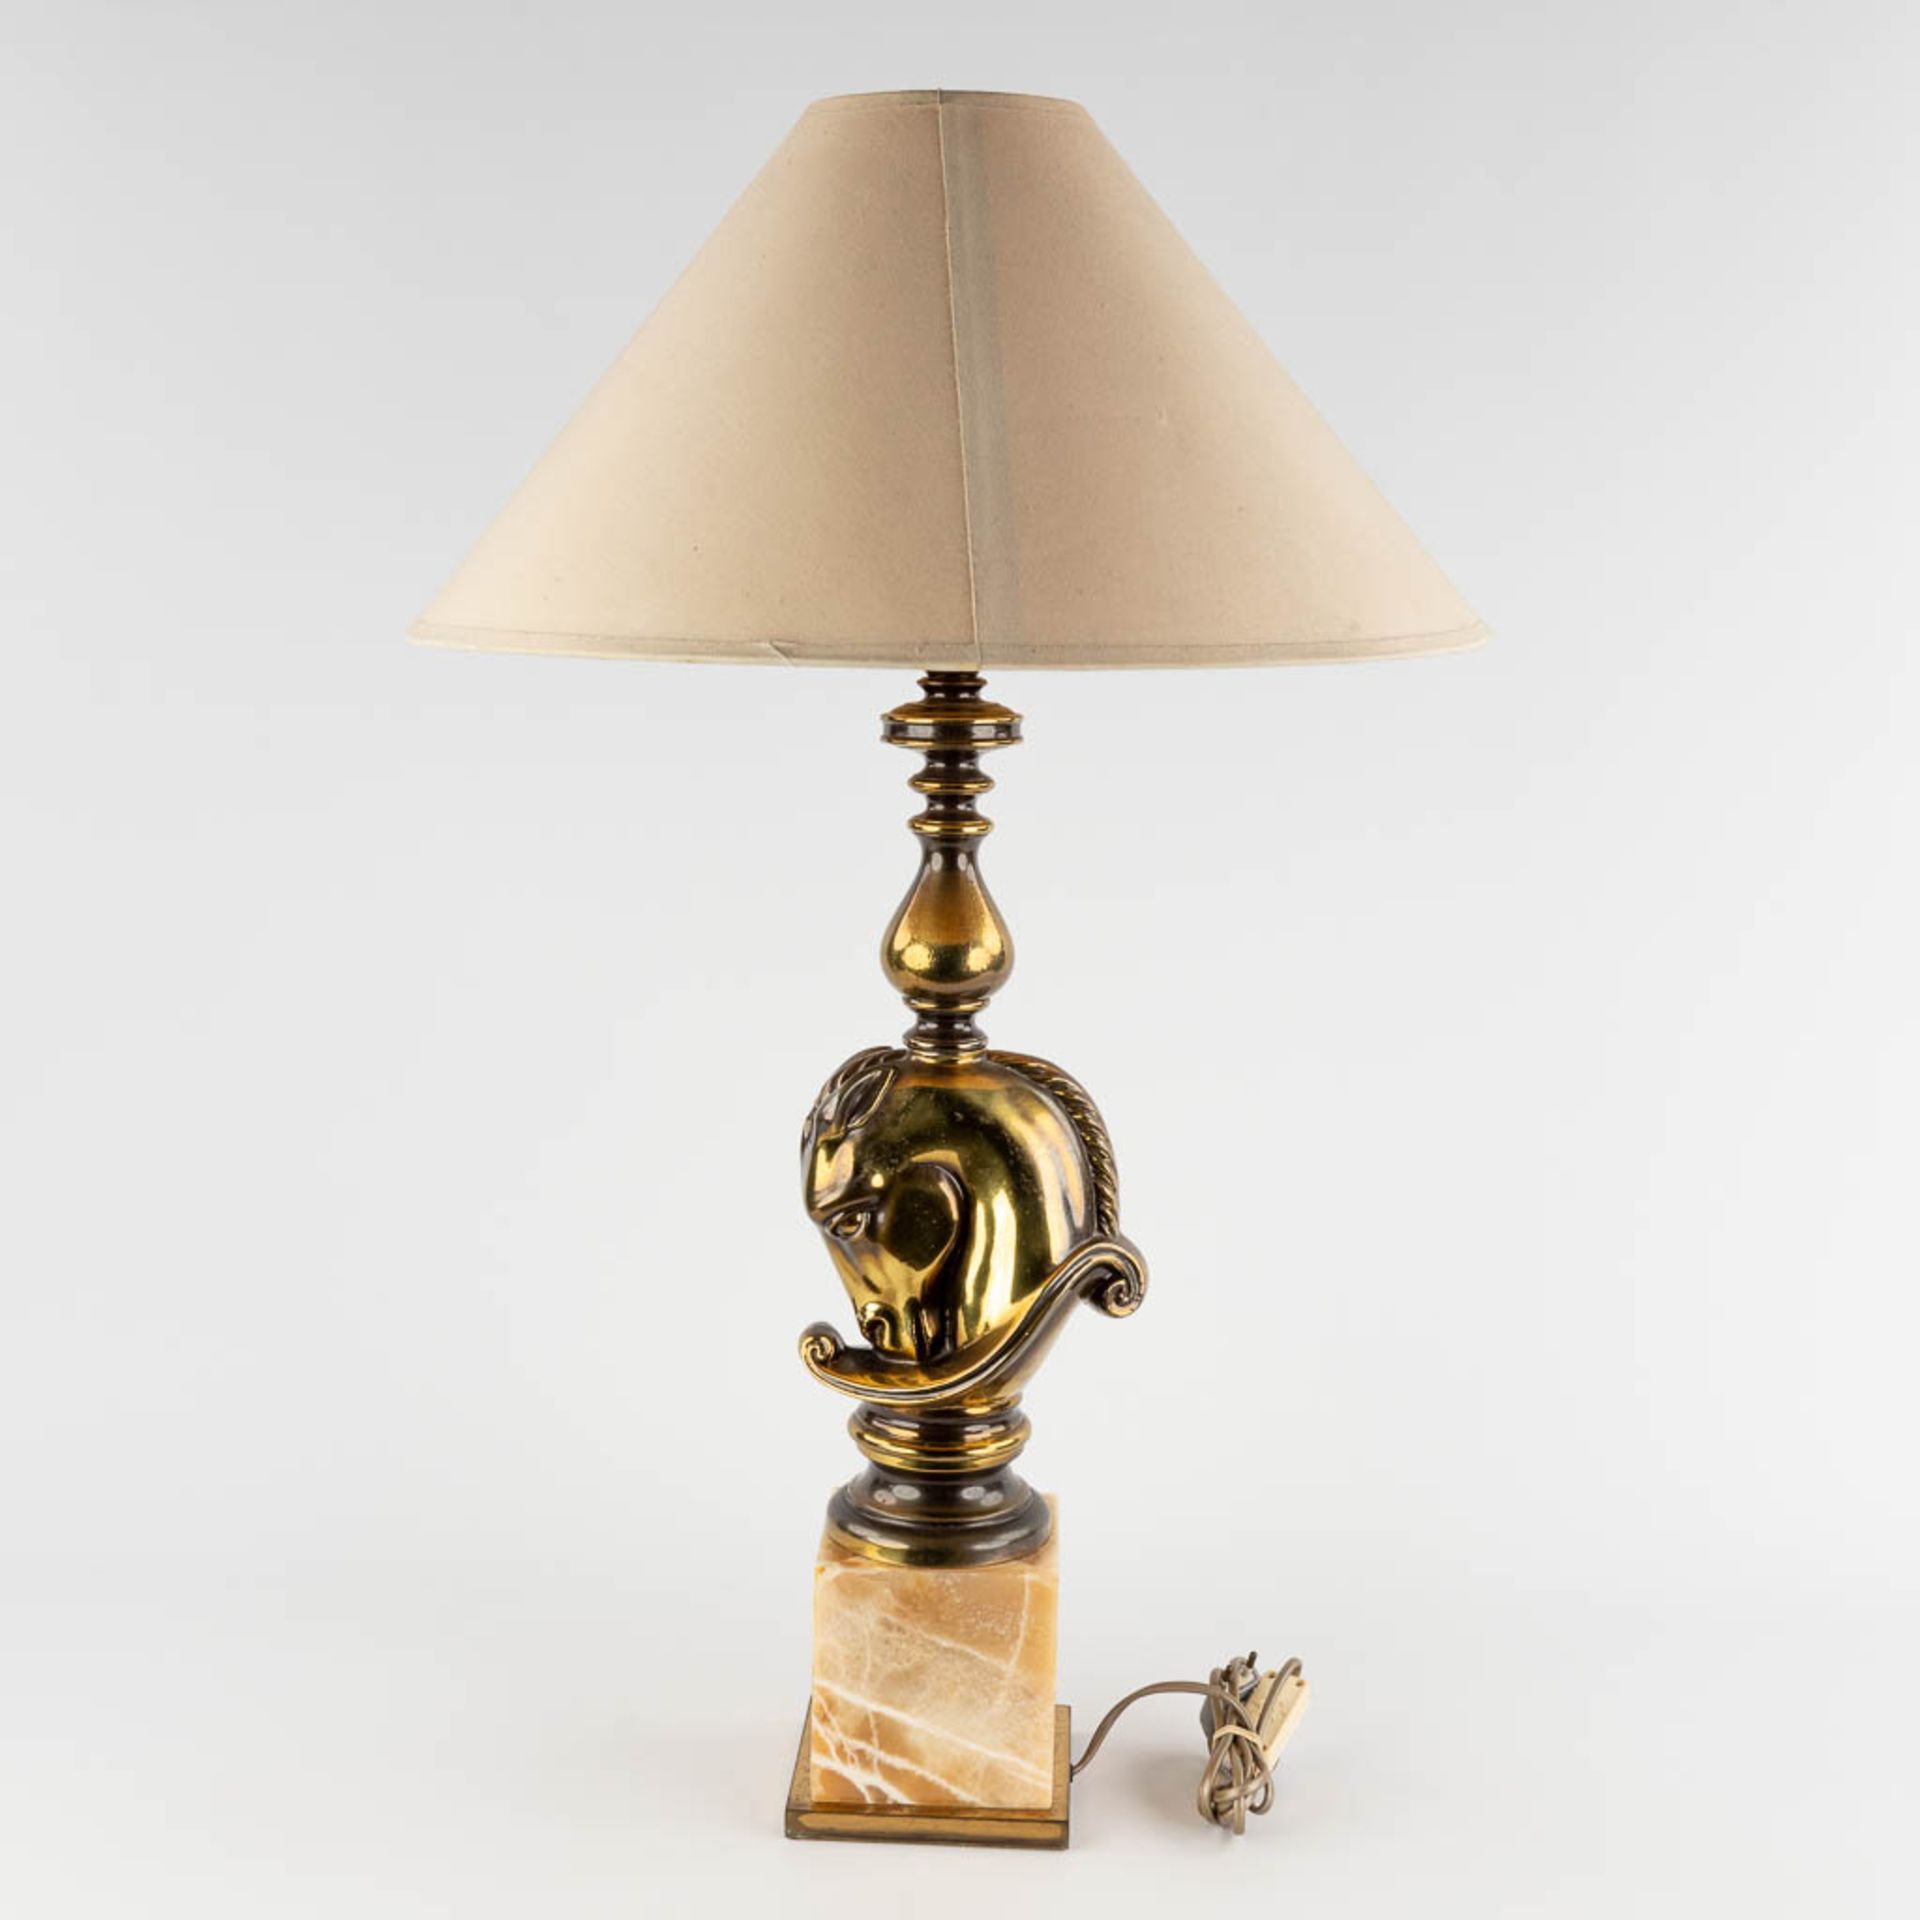 Deknudt, A table lamp with horse head, bronze on onyx. (D:14 x W:18 x H:60 cm) - Image 5 of 10